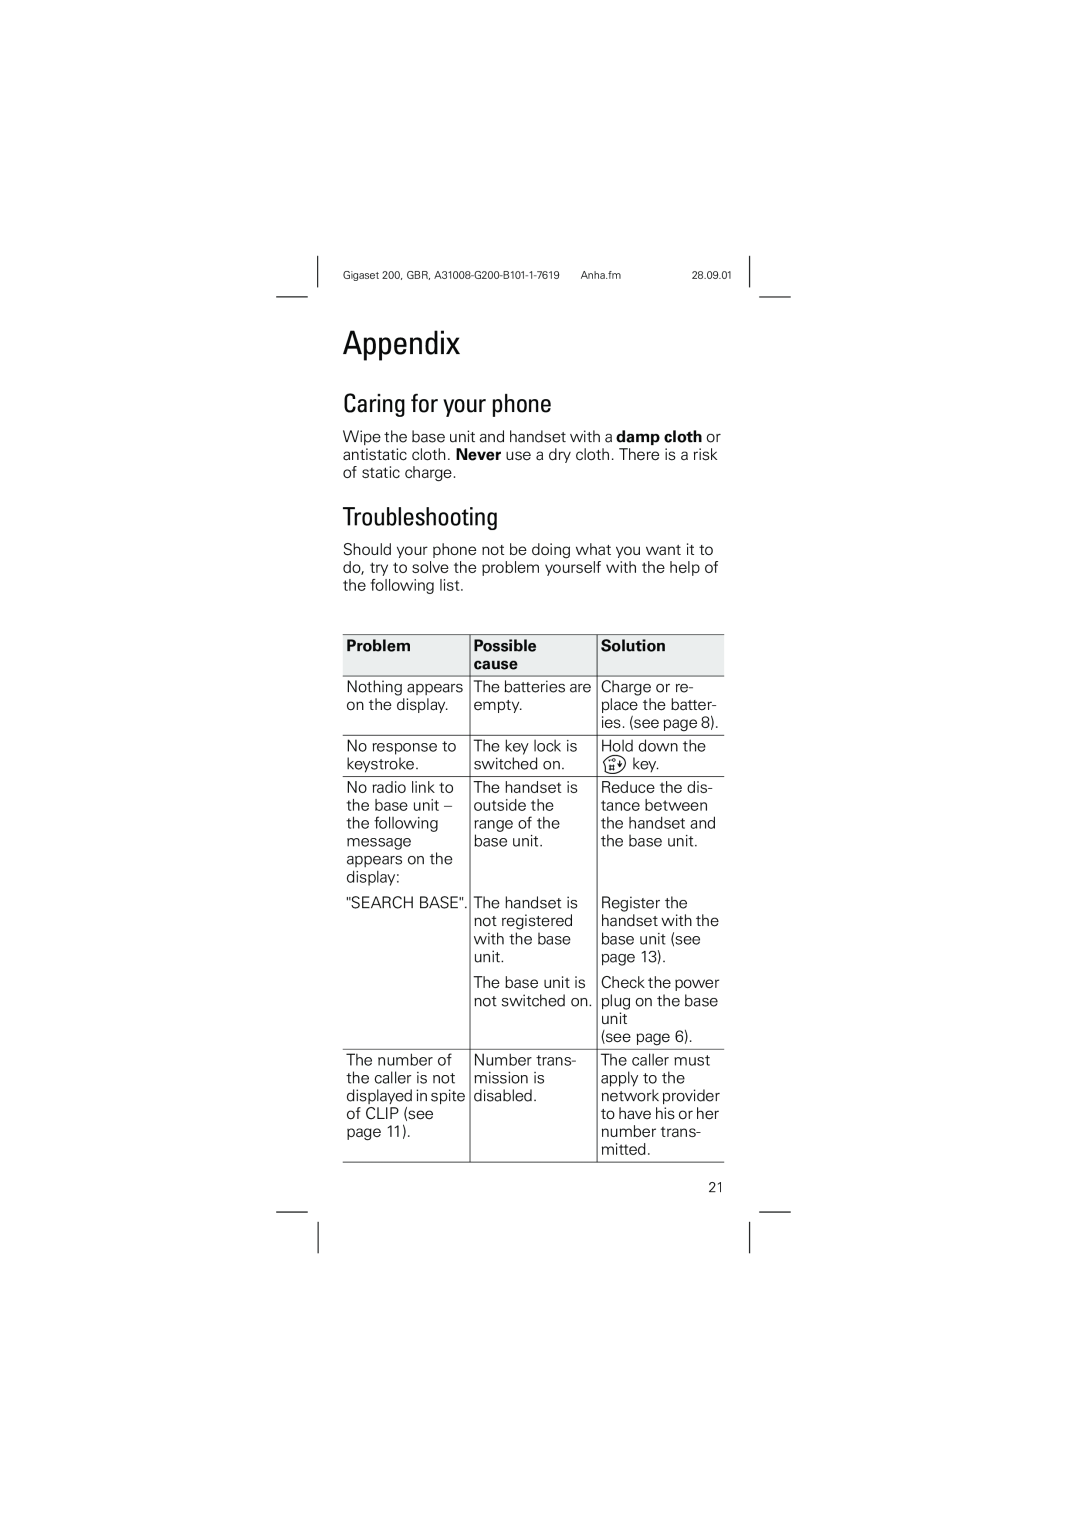 Siemens 200 manual Appendix, Caring for your phone, Troubleshooting, Problem, Possible, Solution, cause 